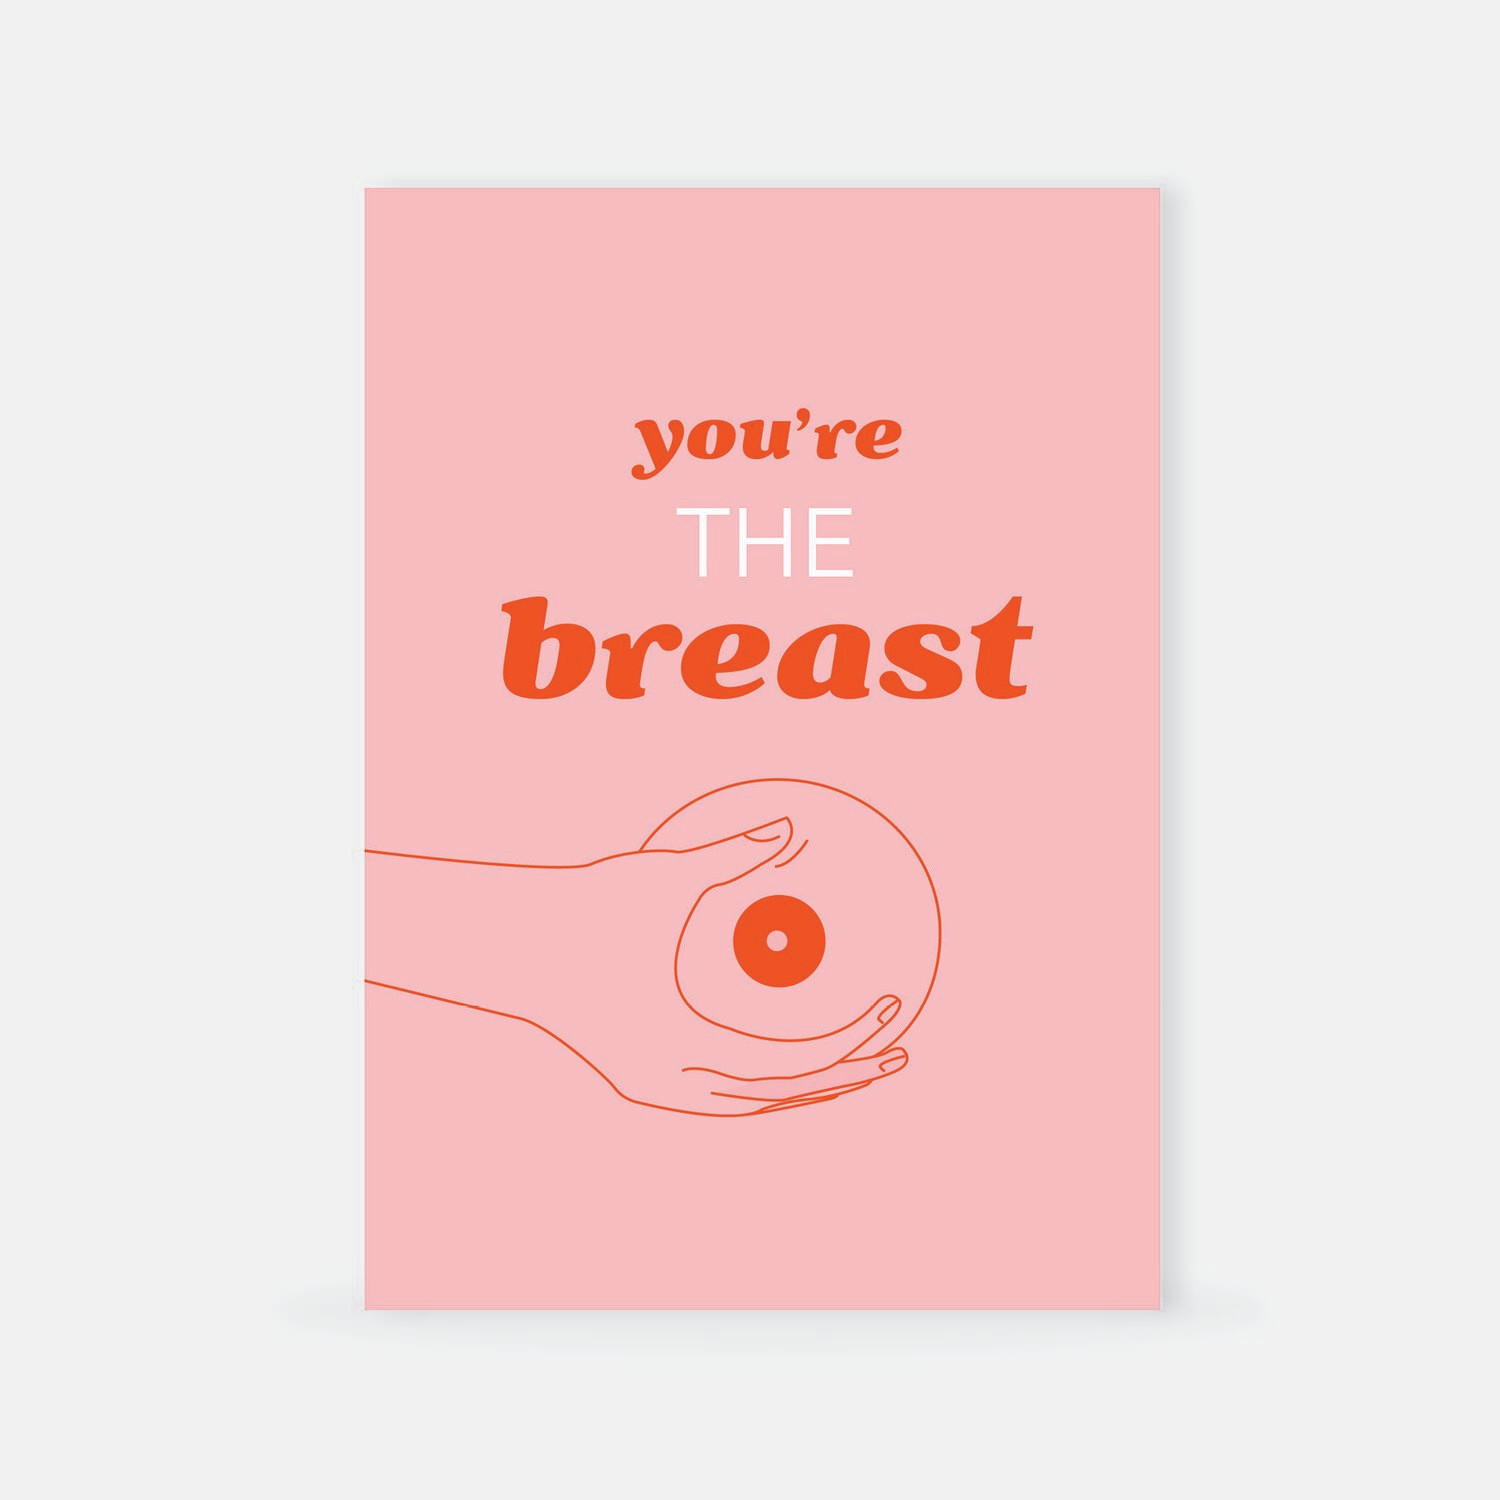 You're the breast